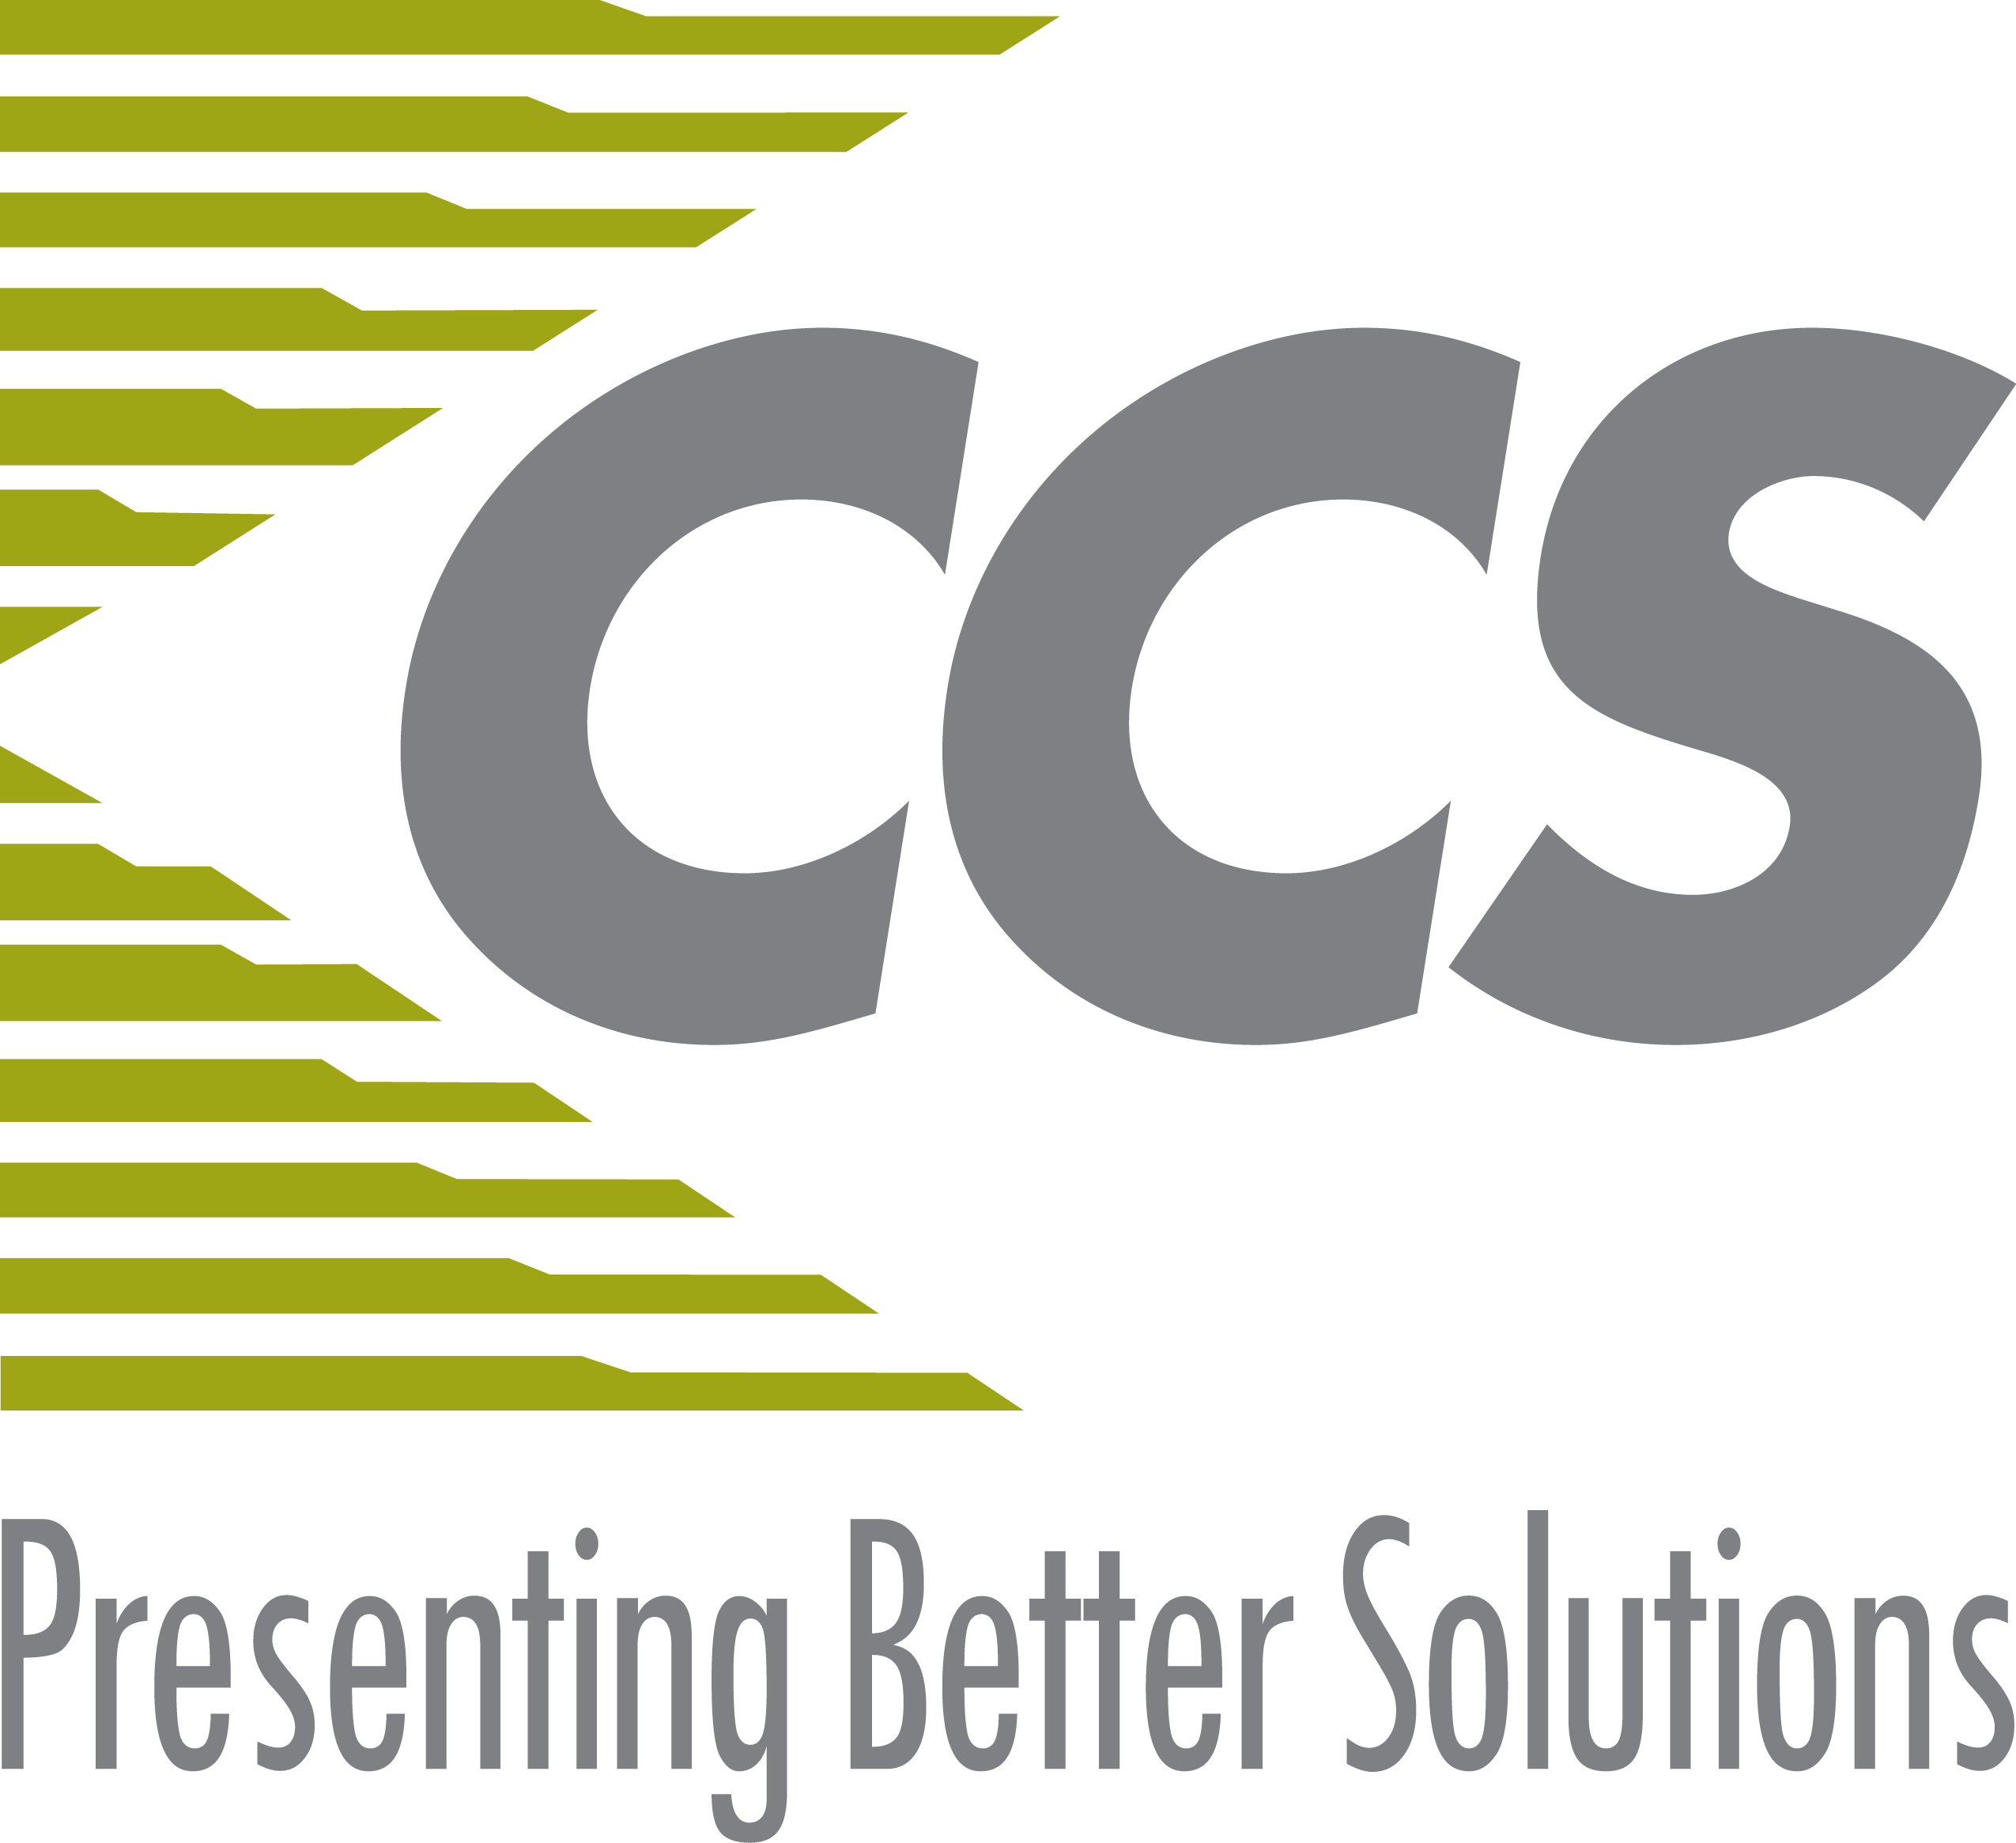 CCS Logo - ccs-southeast-doral-chamber-of-commerce-logo | The Doral Chamber of ...